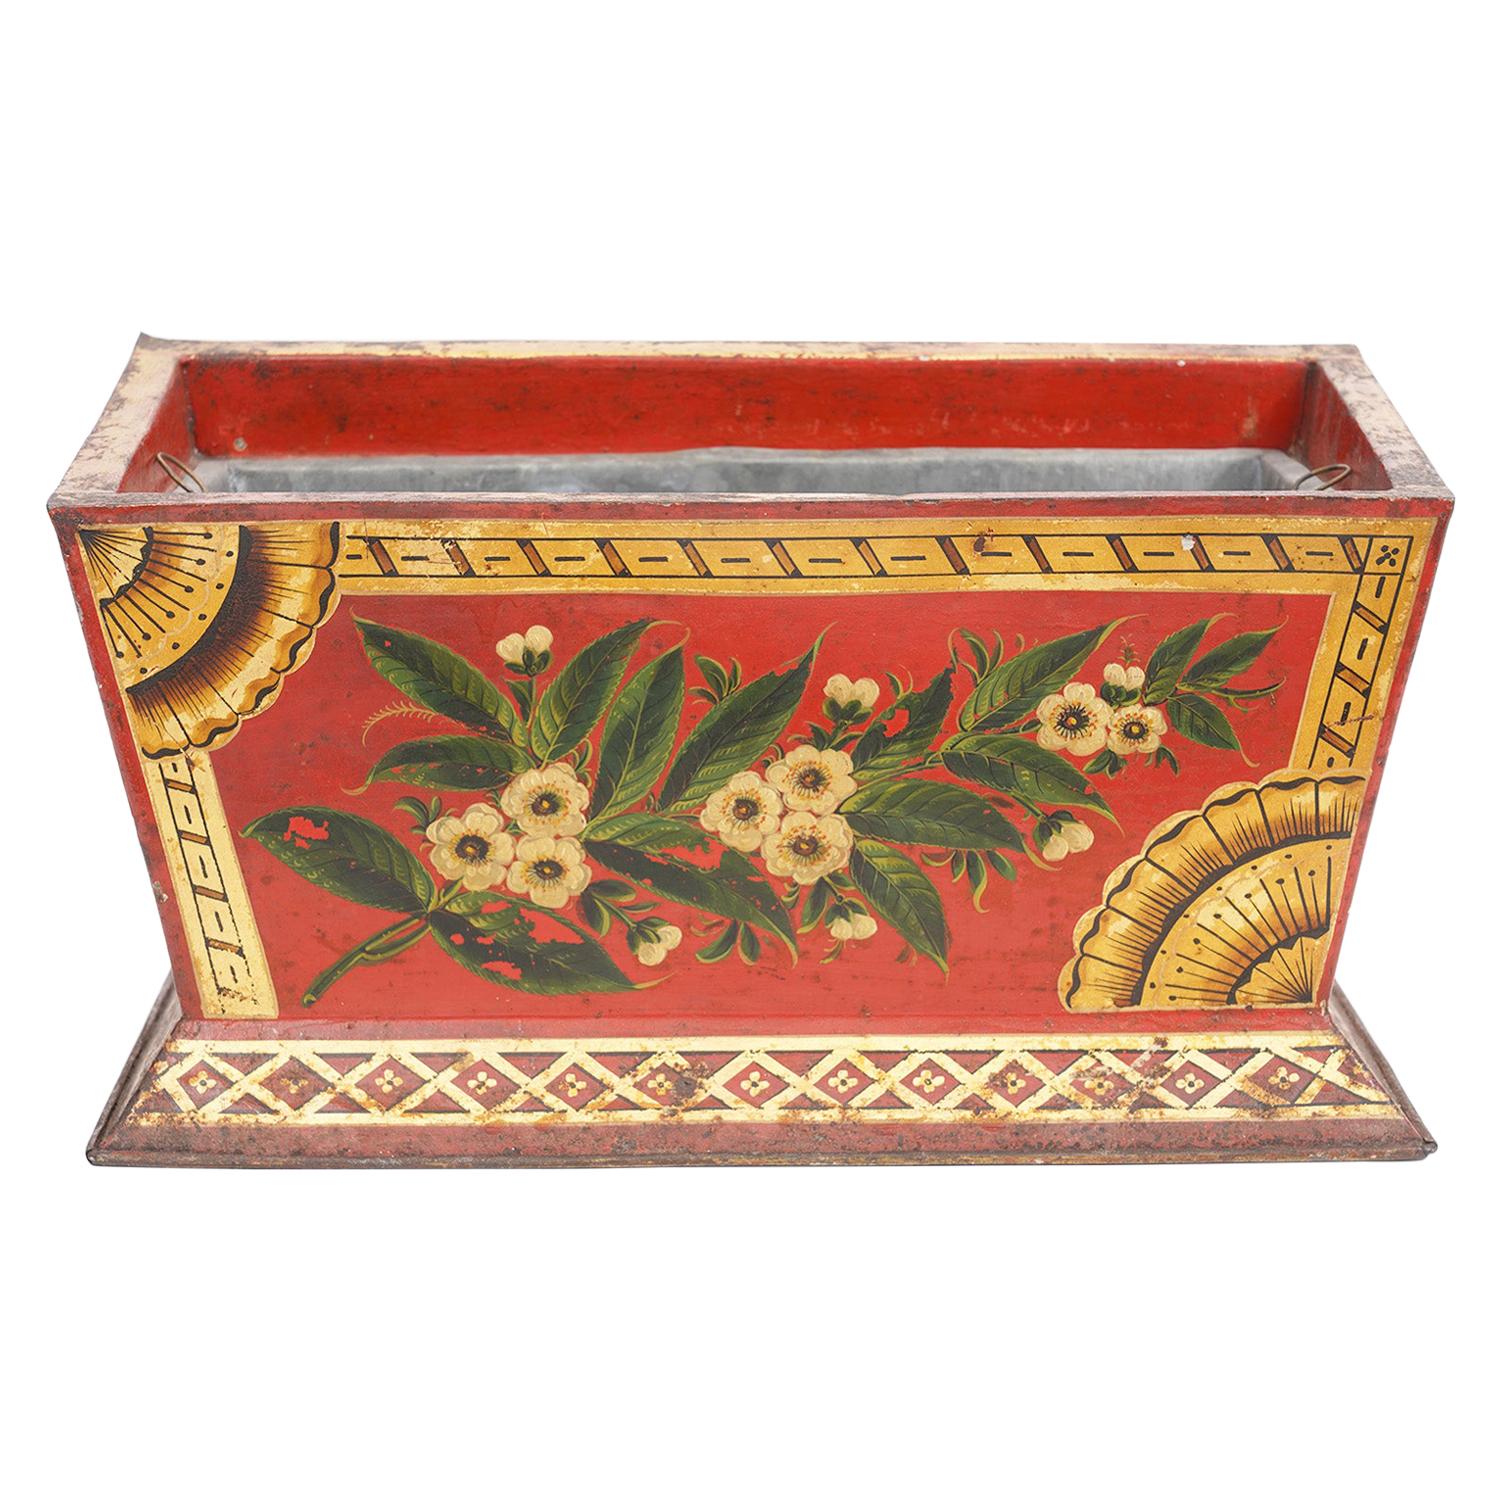 Early 19th Century English Tole Jardinière Painted with Flowers on Red Ground